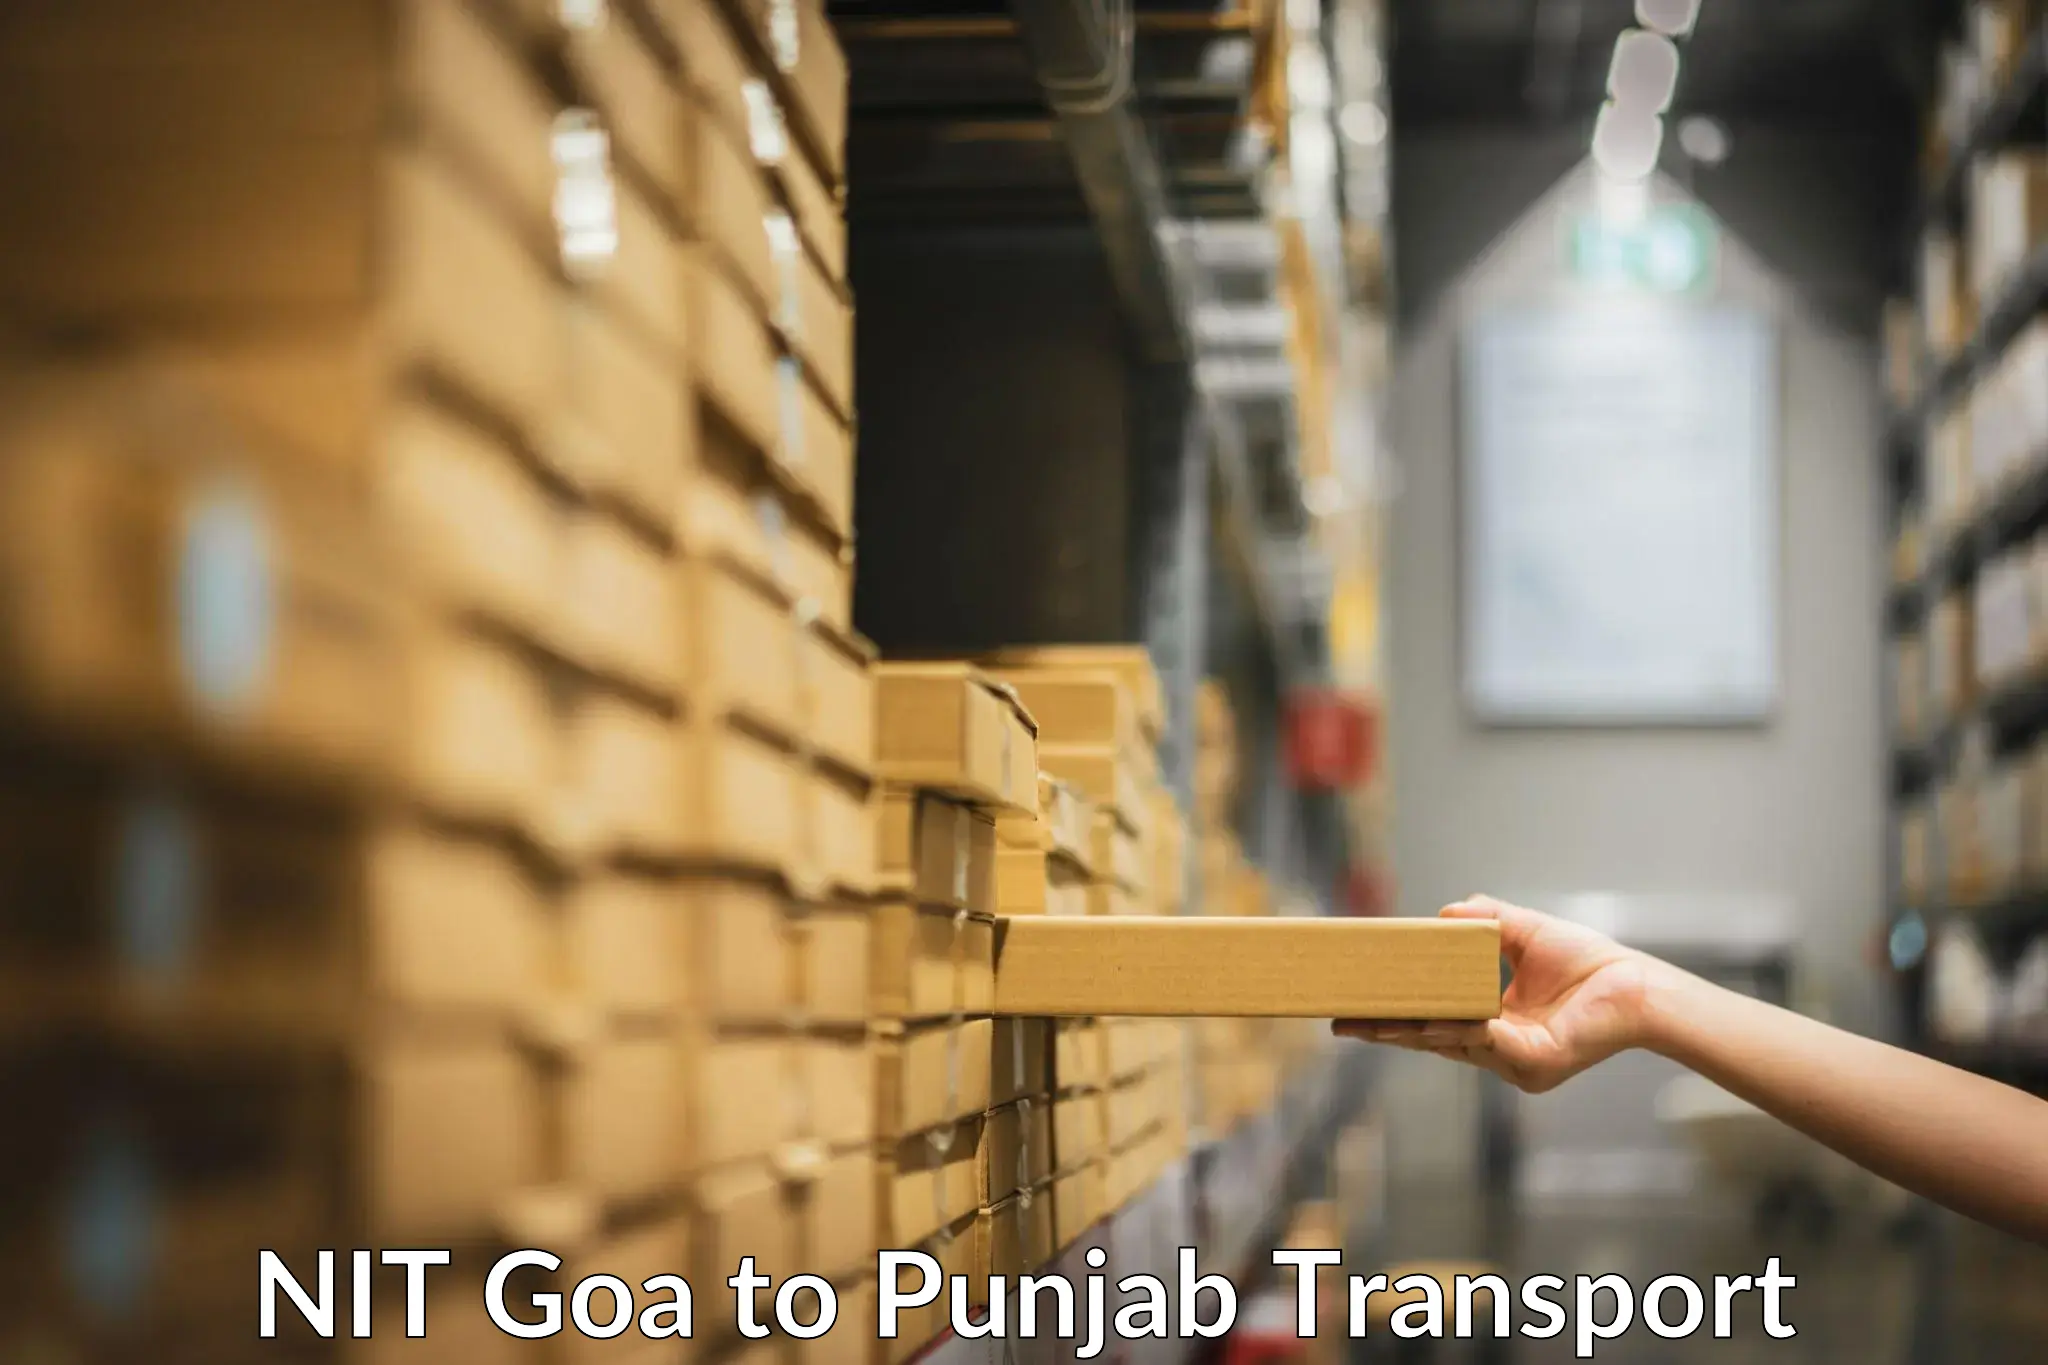 Nearby transport service NIT Goa to Mohali